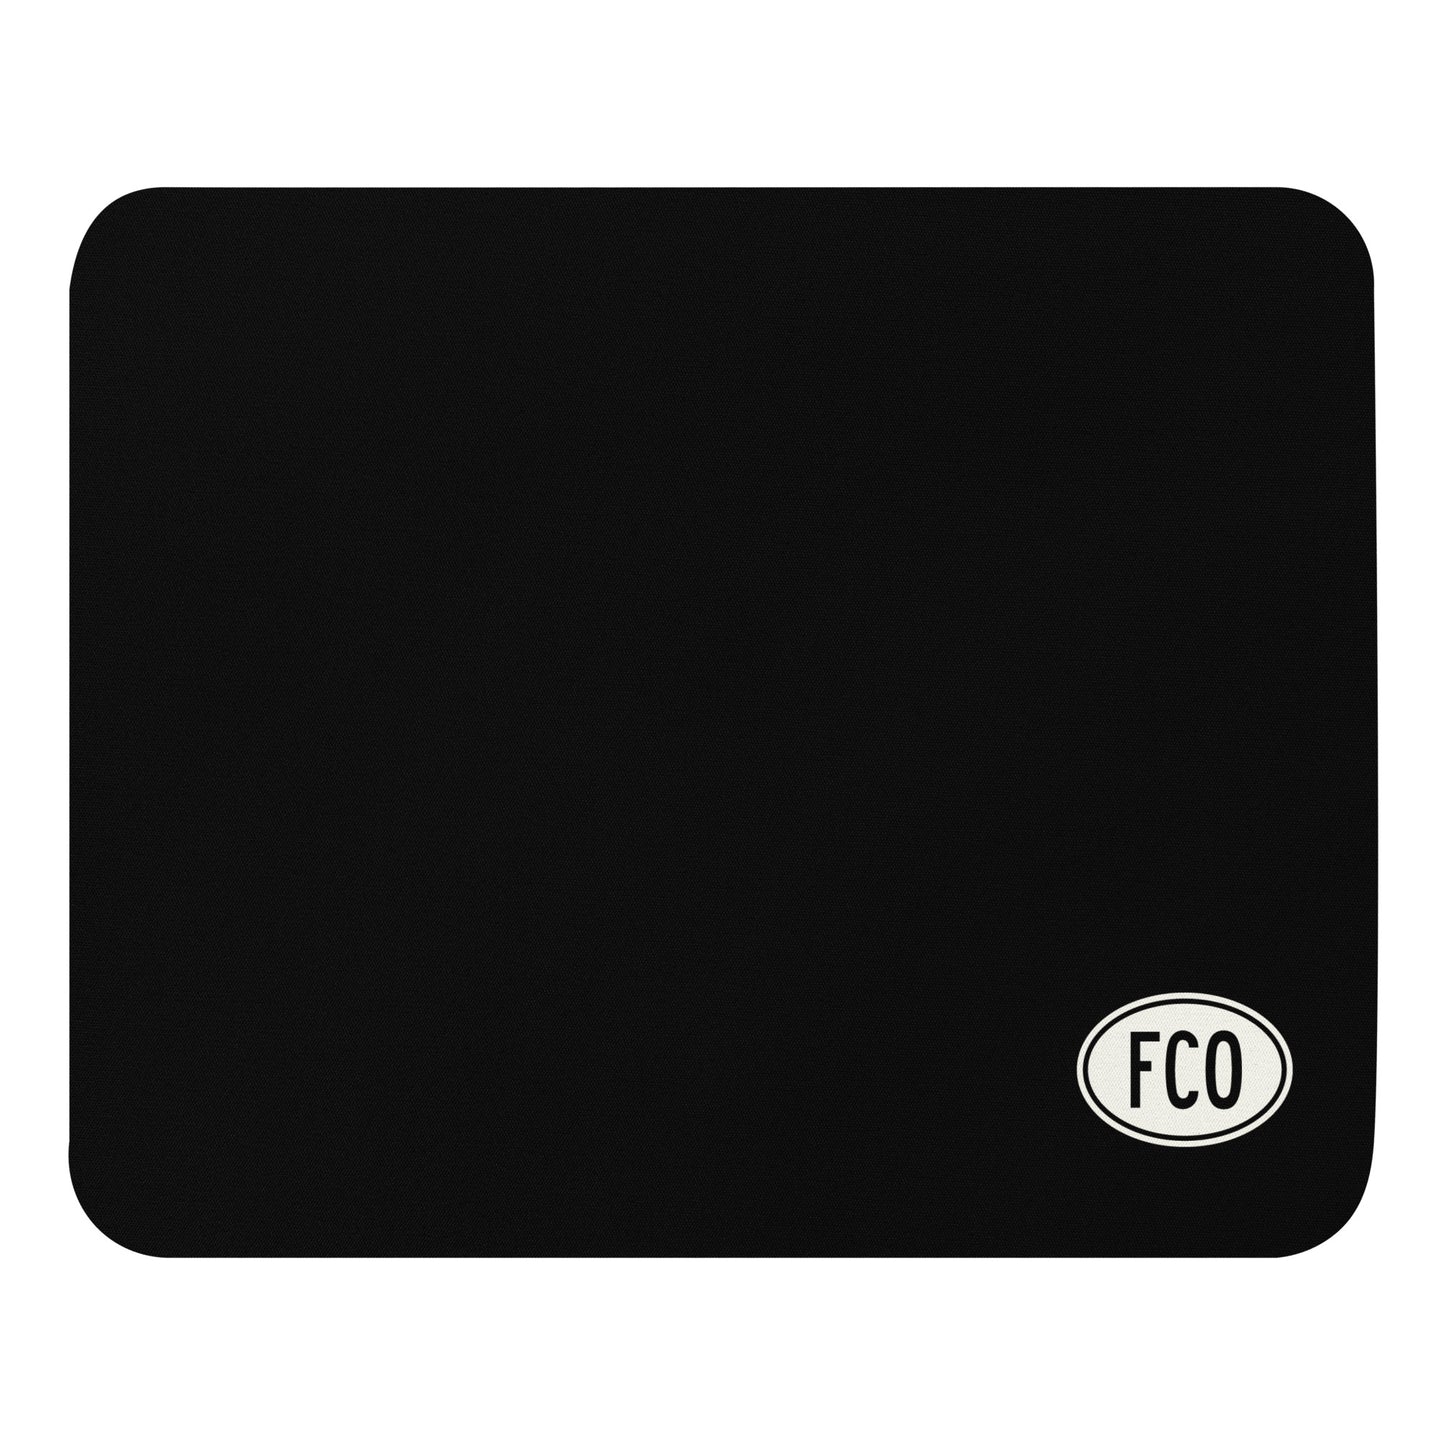 Unique Travel Gift Mouse Pad - White Oval • FCO Rome • YHM Designs - Image 01